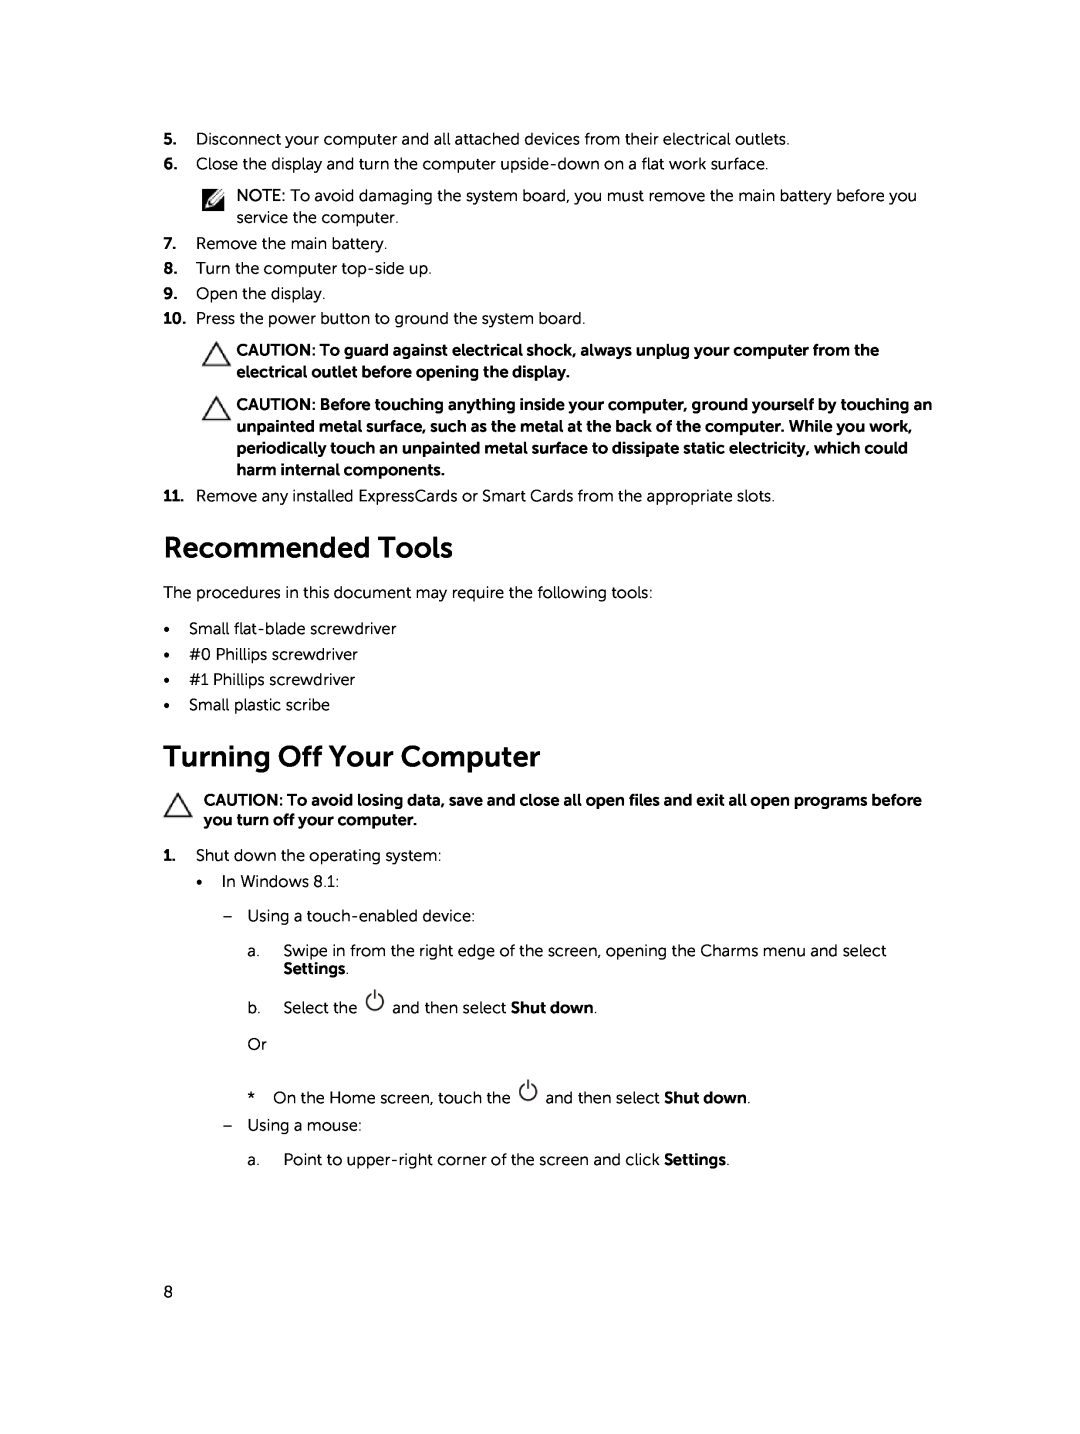 Dell 15  - 3549 owner manual Recommended Tools, Turning Off Your Computer 